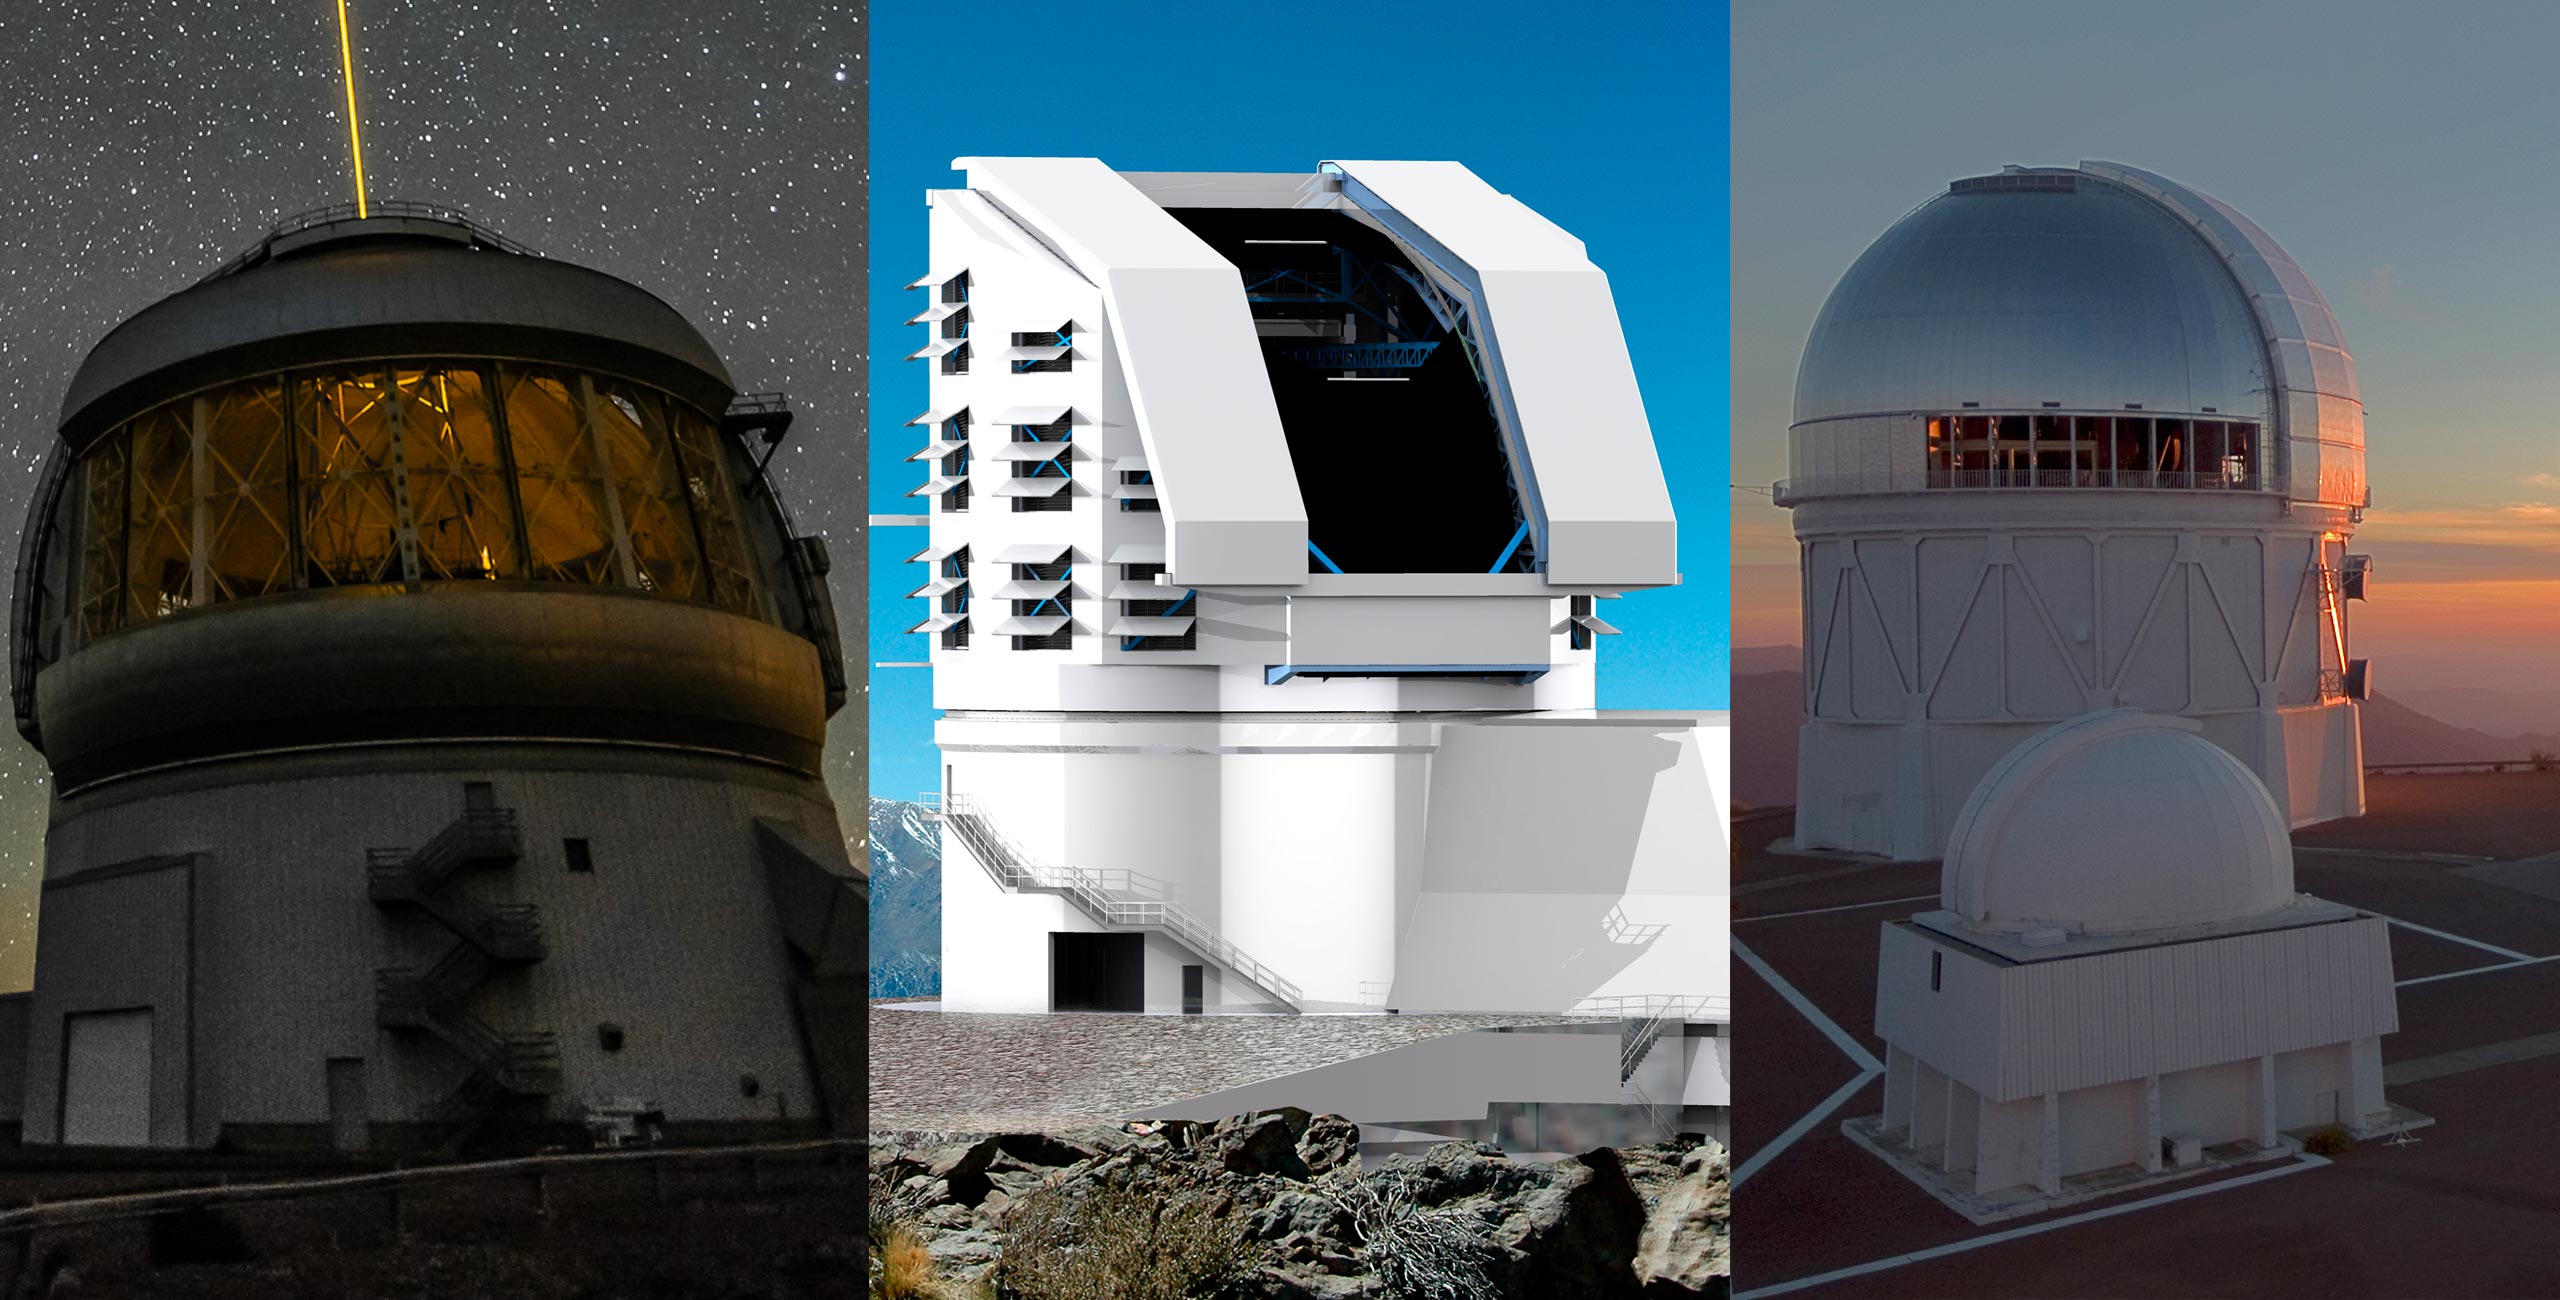 image od gemini south, LSST and CTIO